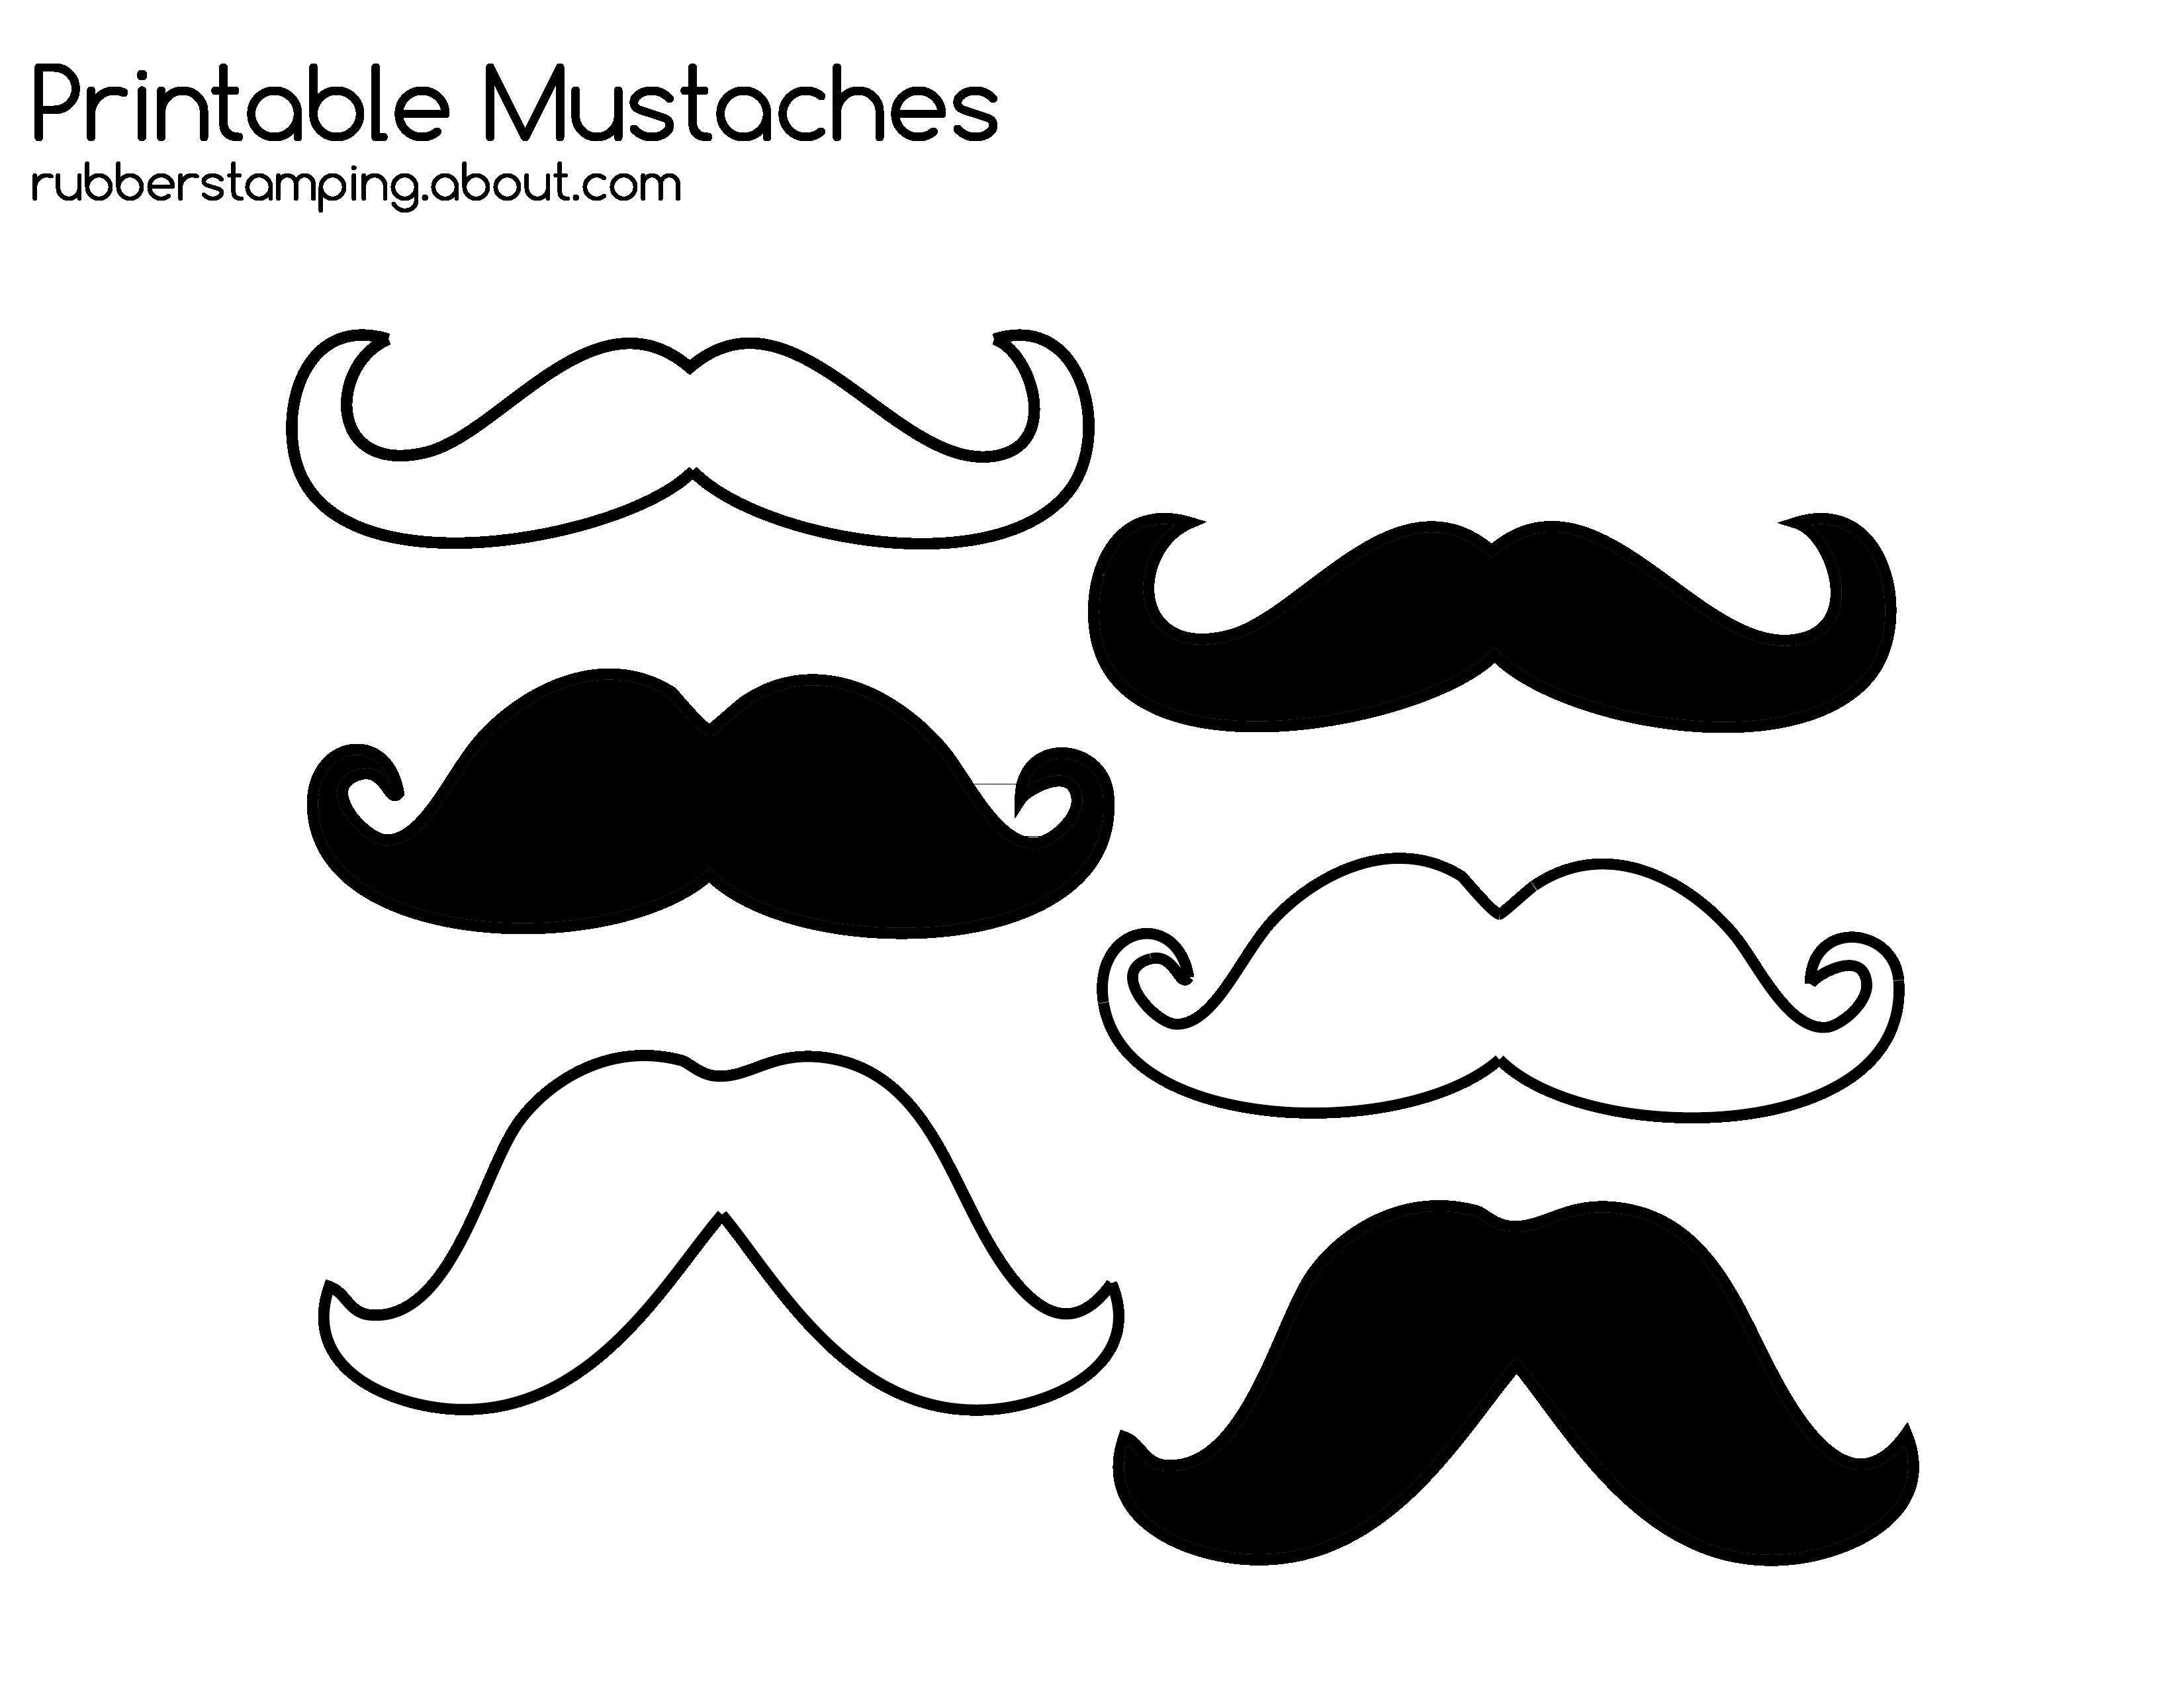 Free Printable Mustache Images For Your Craft Projects DIY